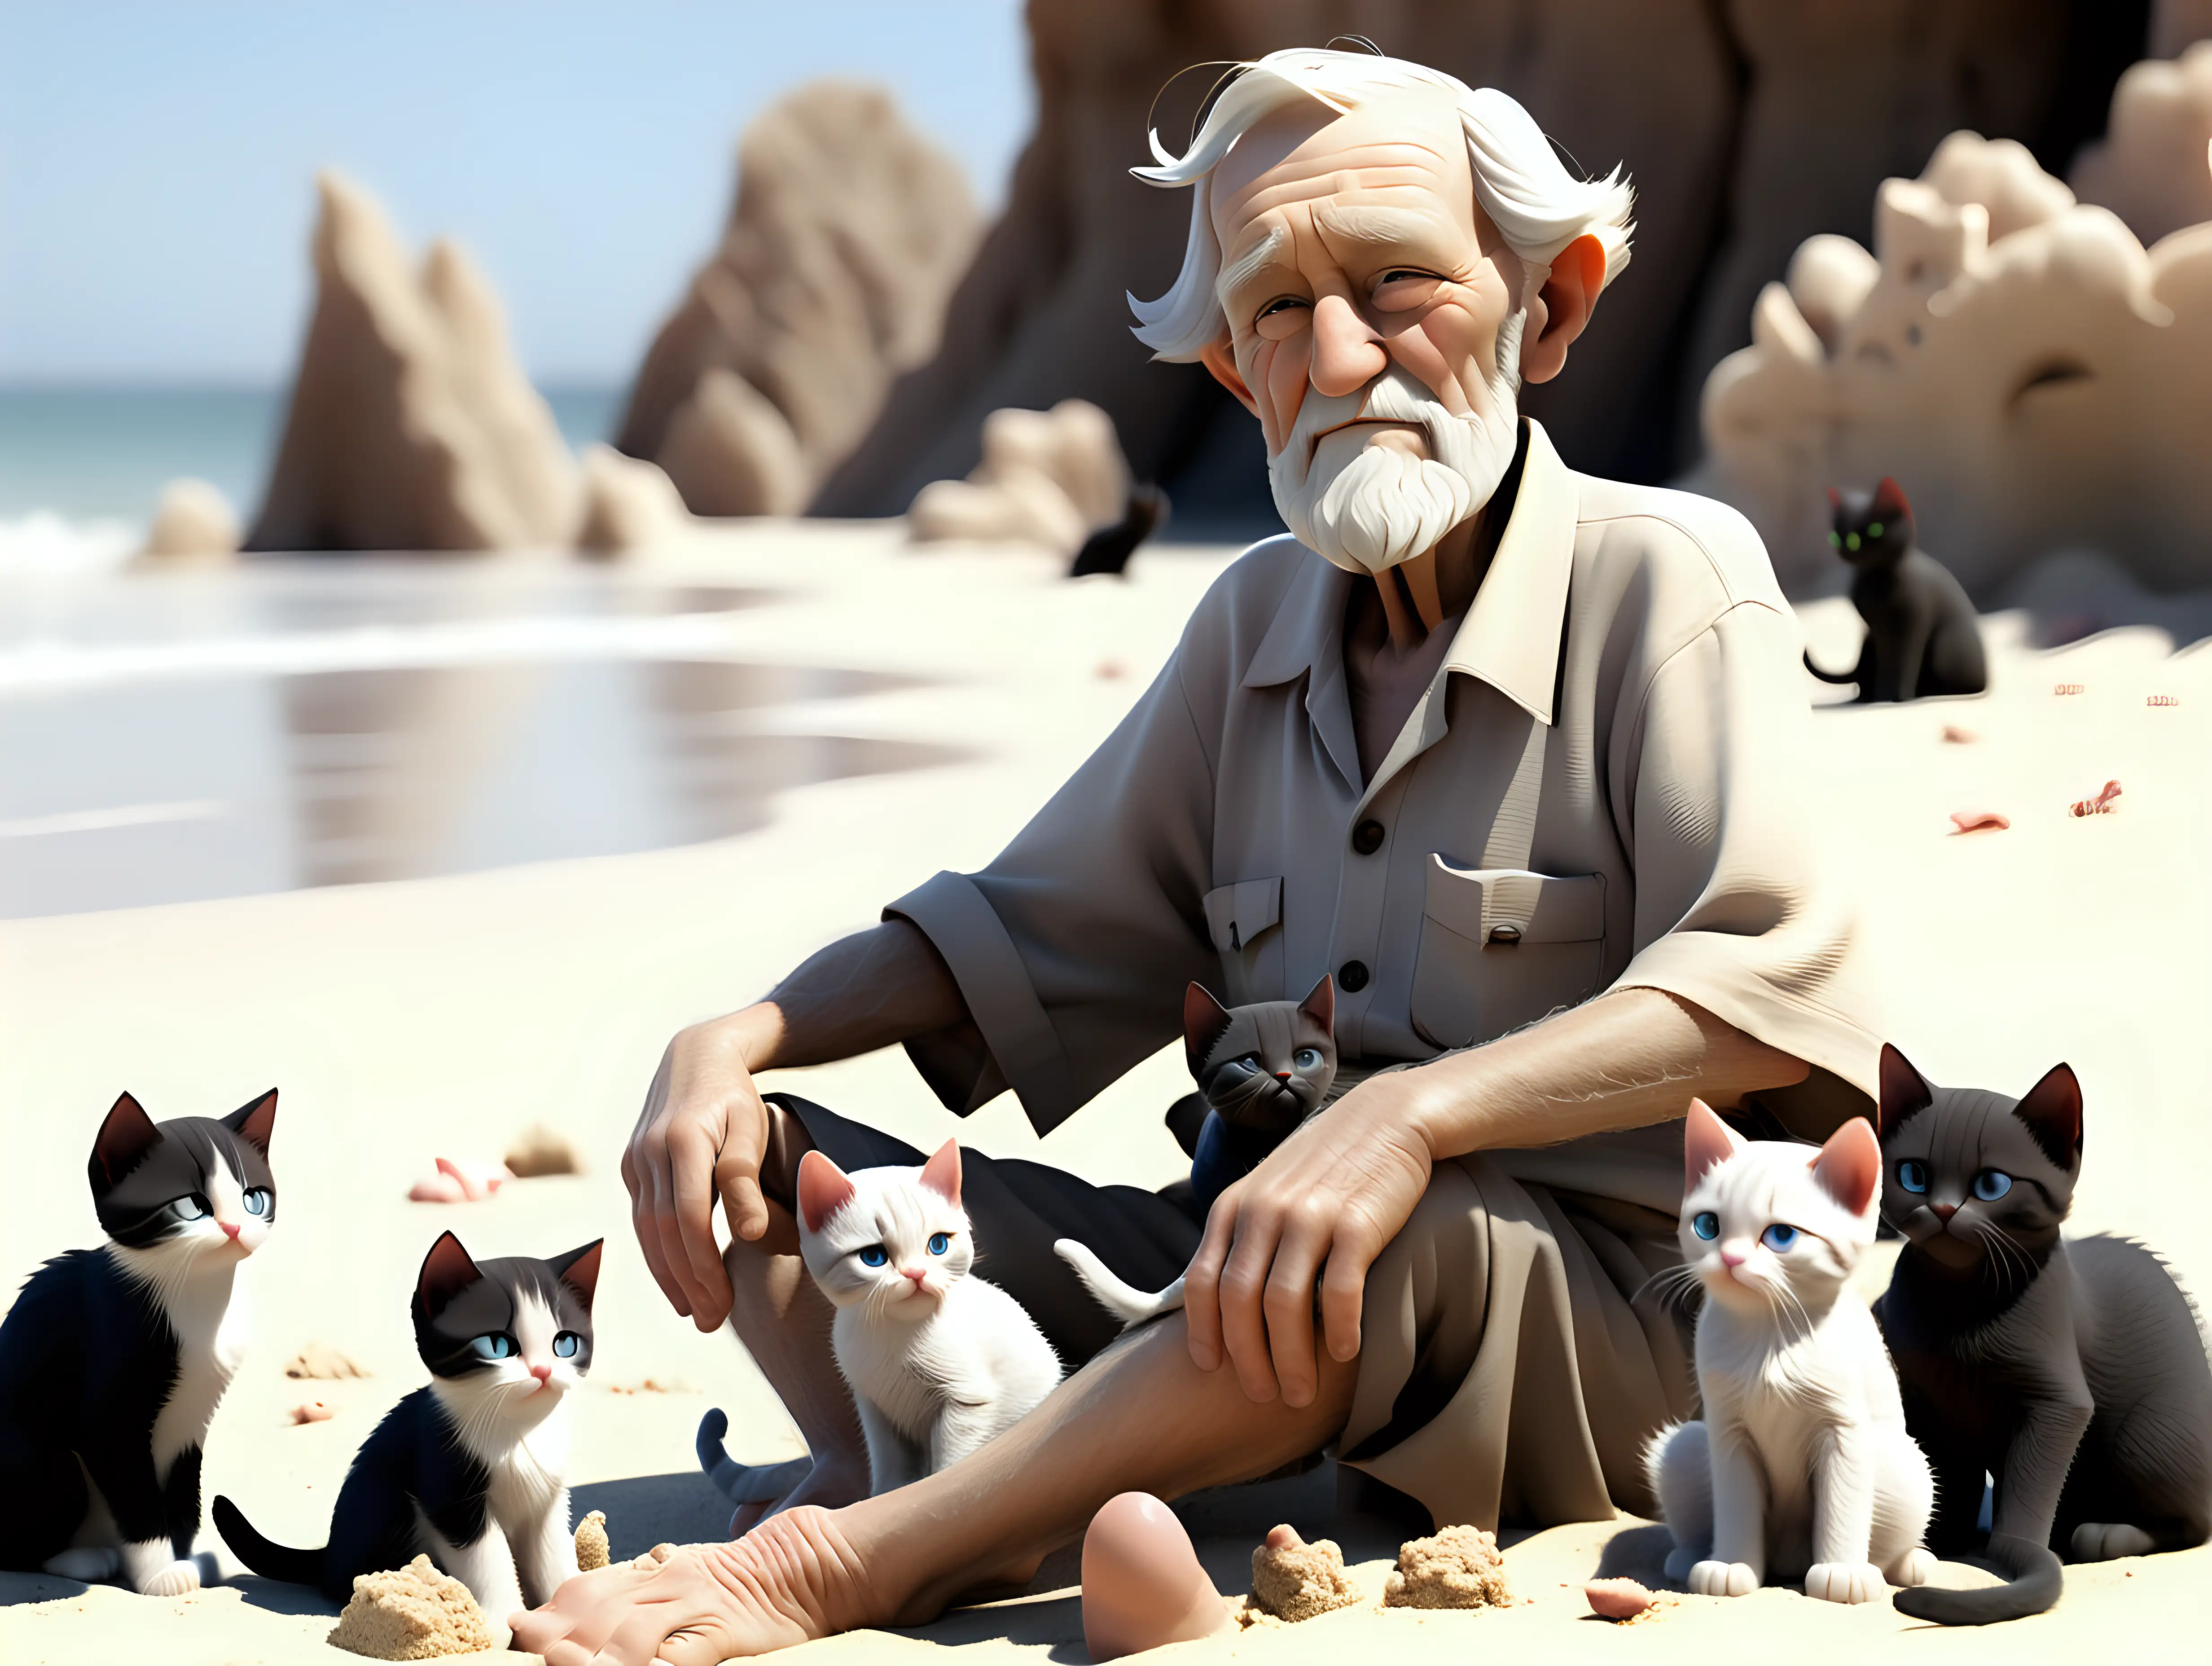 old man sitting on a beach surrounded by kittens